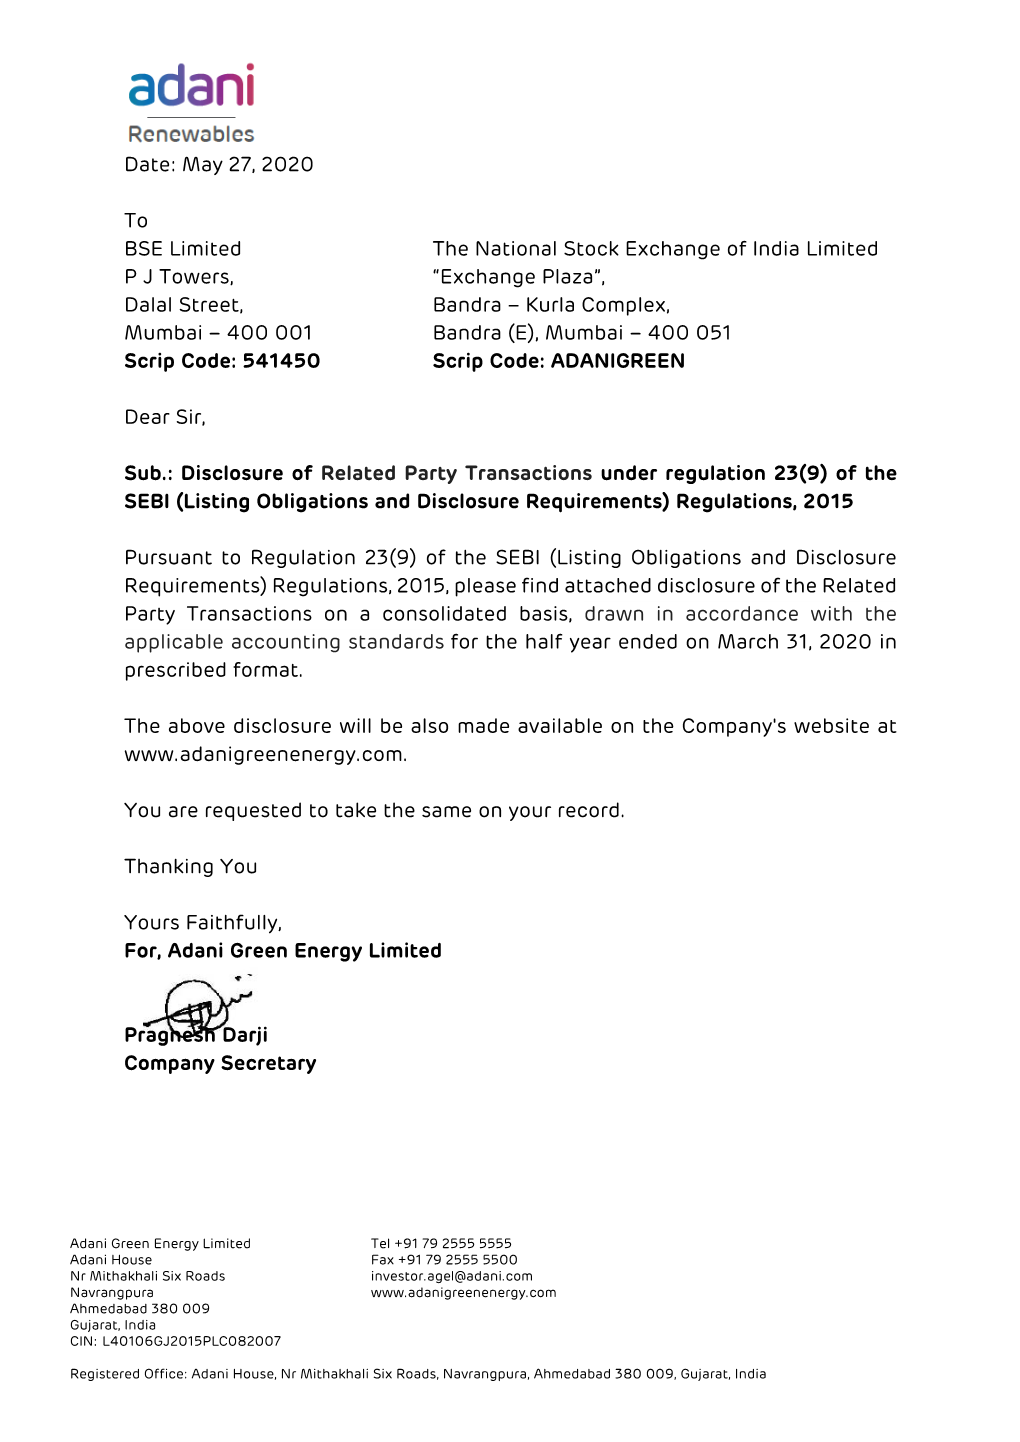 May 27, 2020 to BSE Limited the National Stock Exchange of India